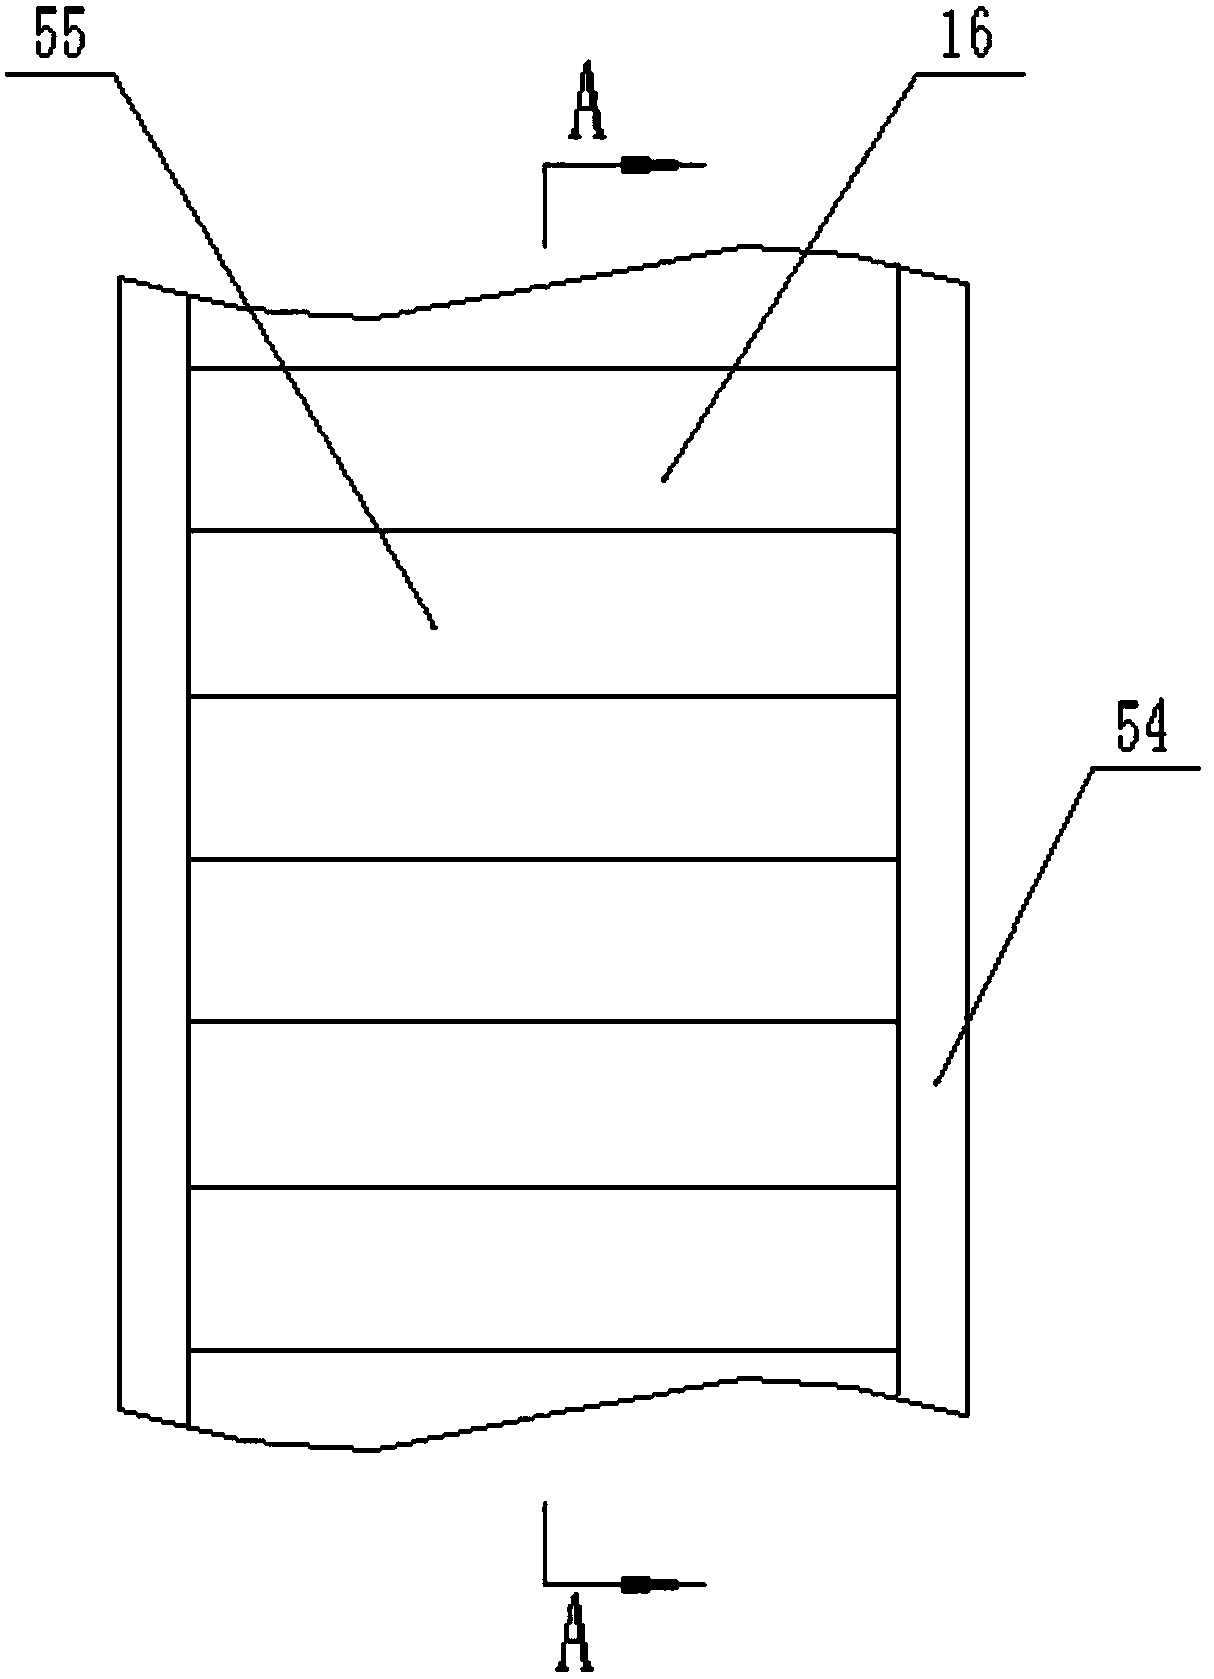 Method for spraying paint to boards